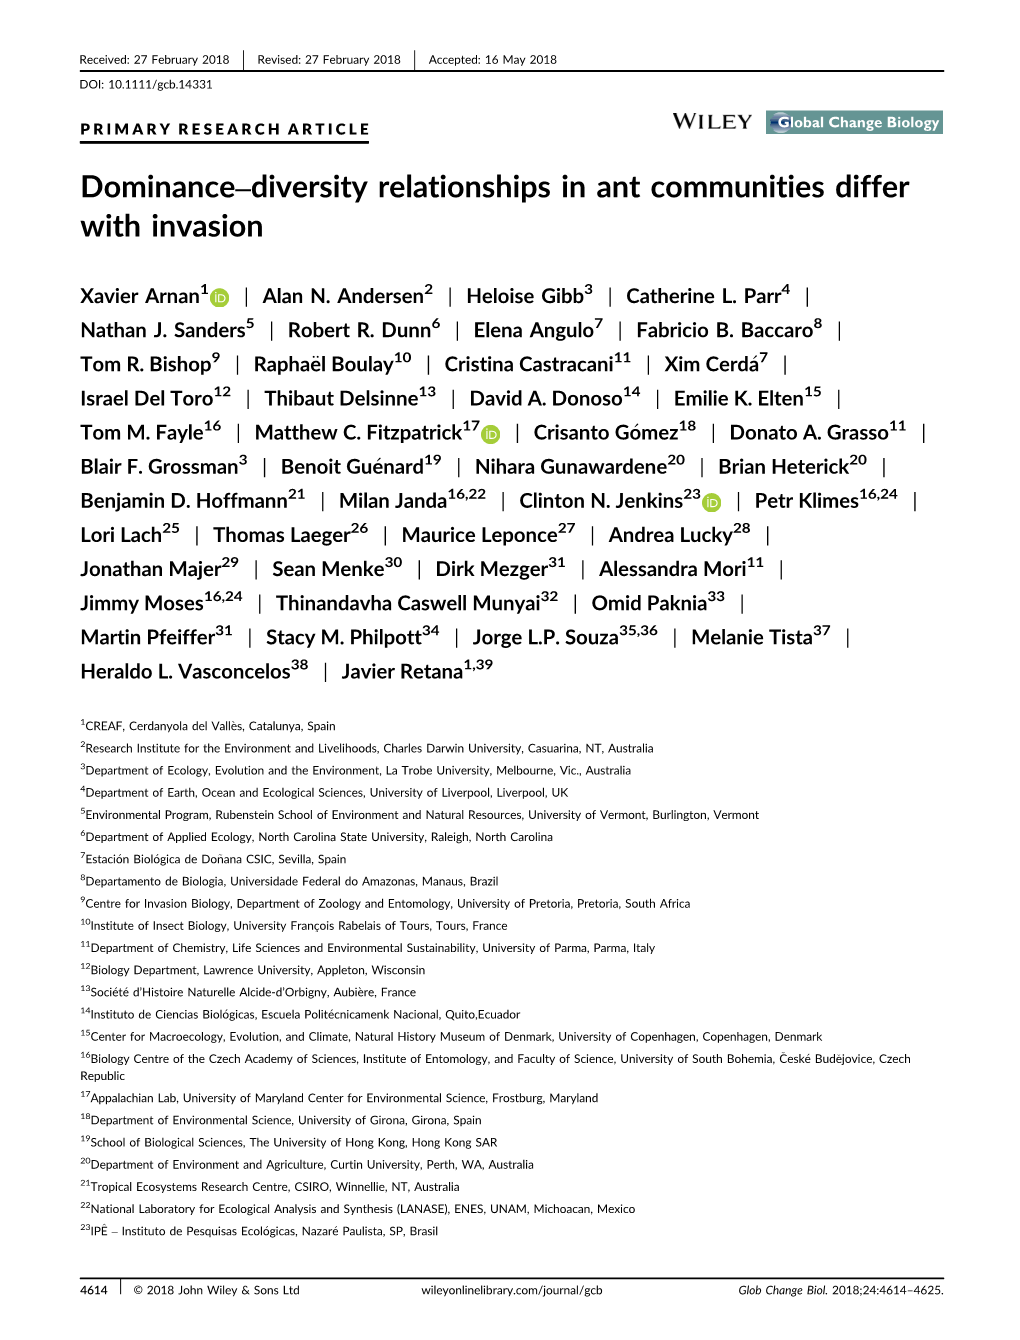 Dominance–Diversity Relationships in Ant Communities Differ with Invasion